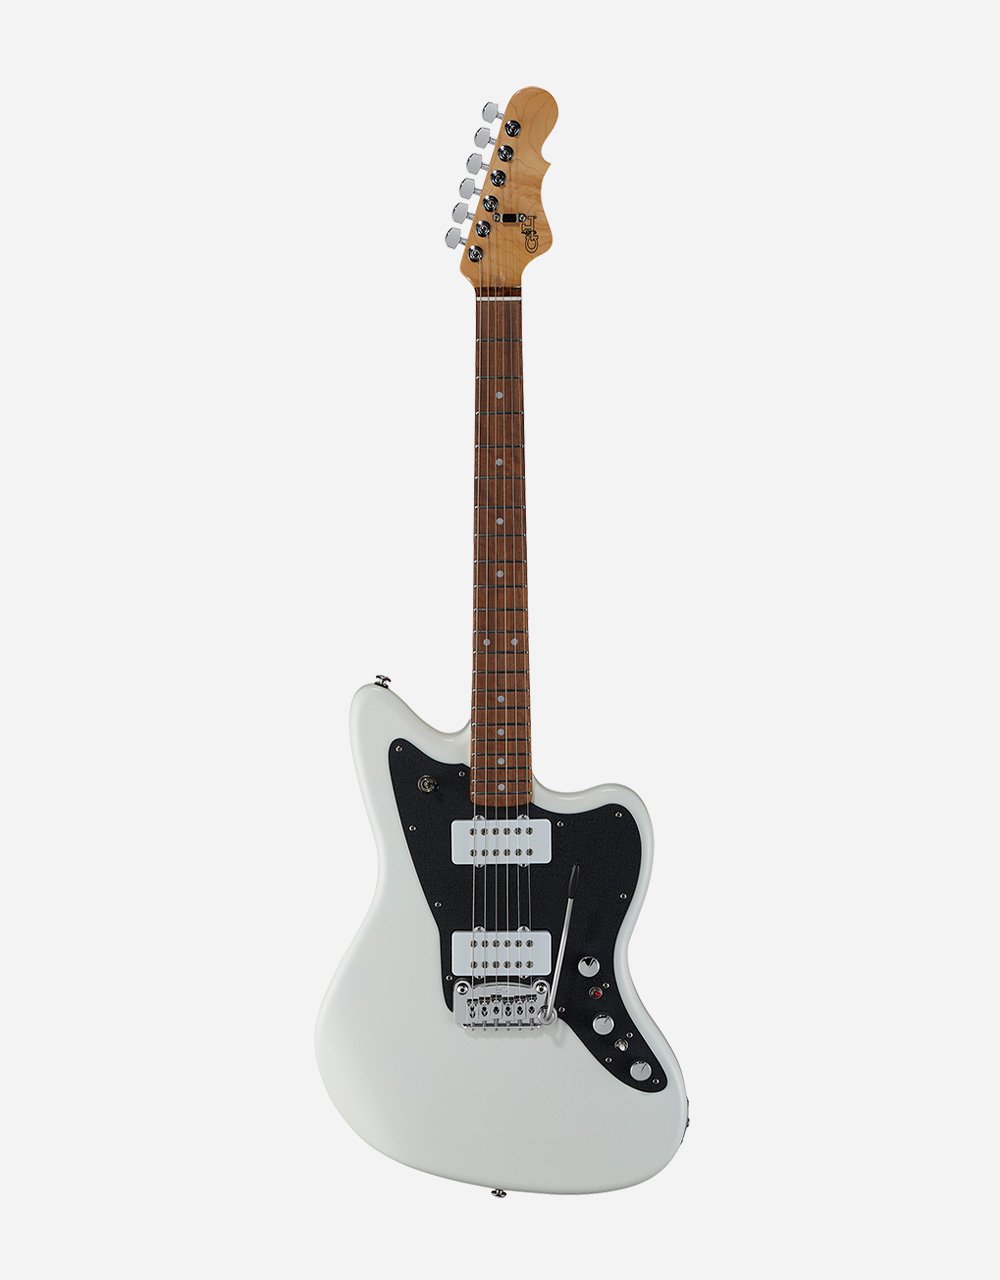 Guitars Doheny | Product categories | G&L Musical Instruments